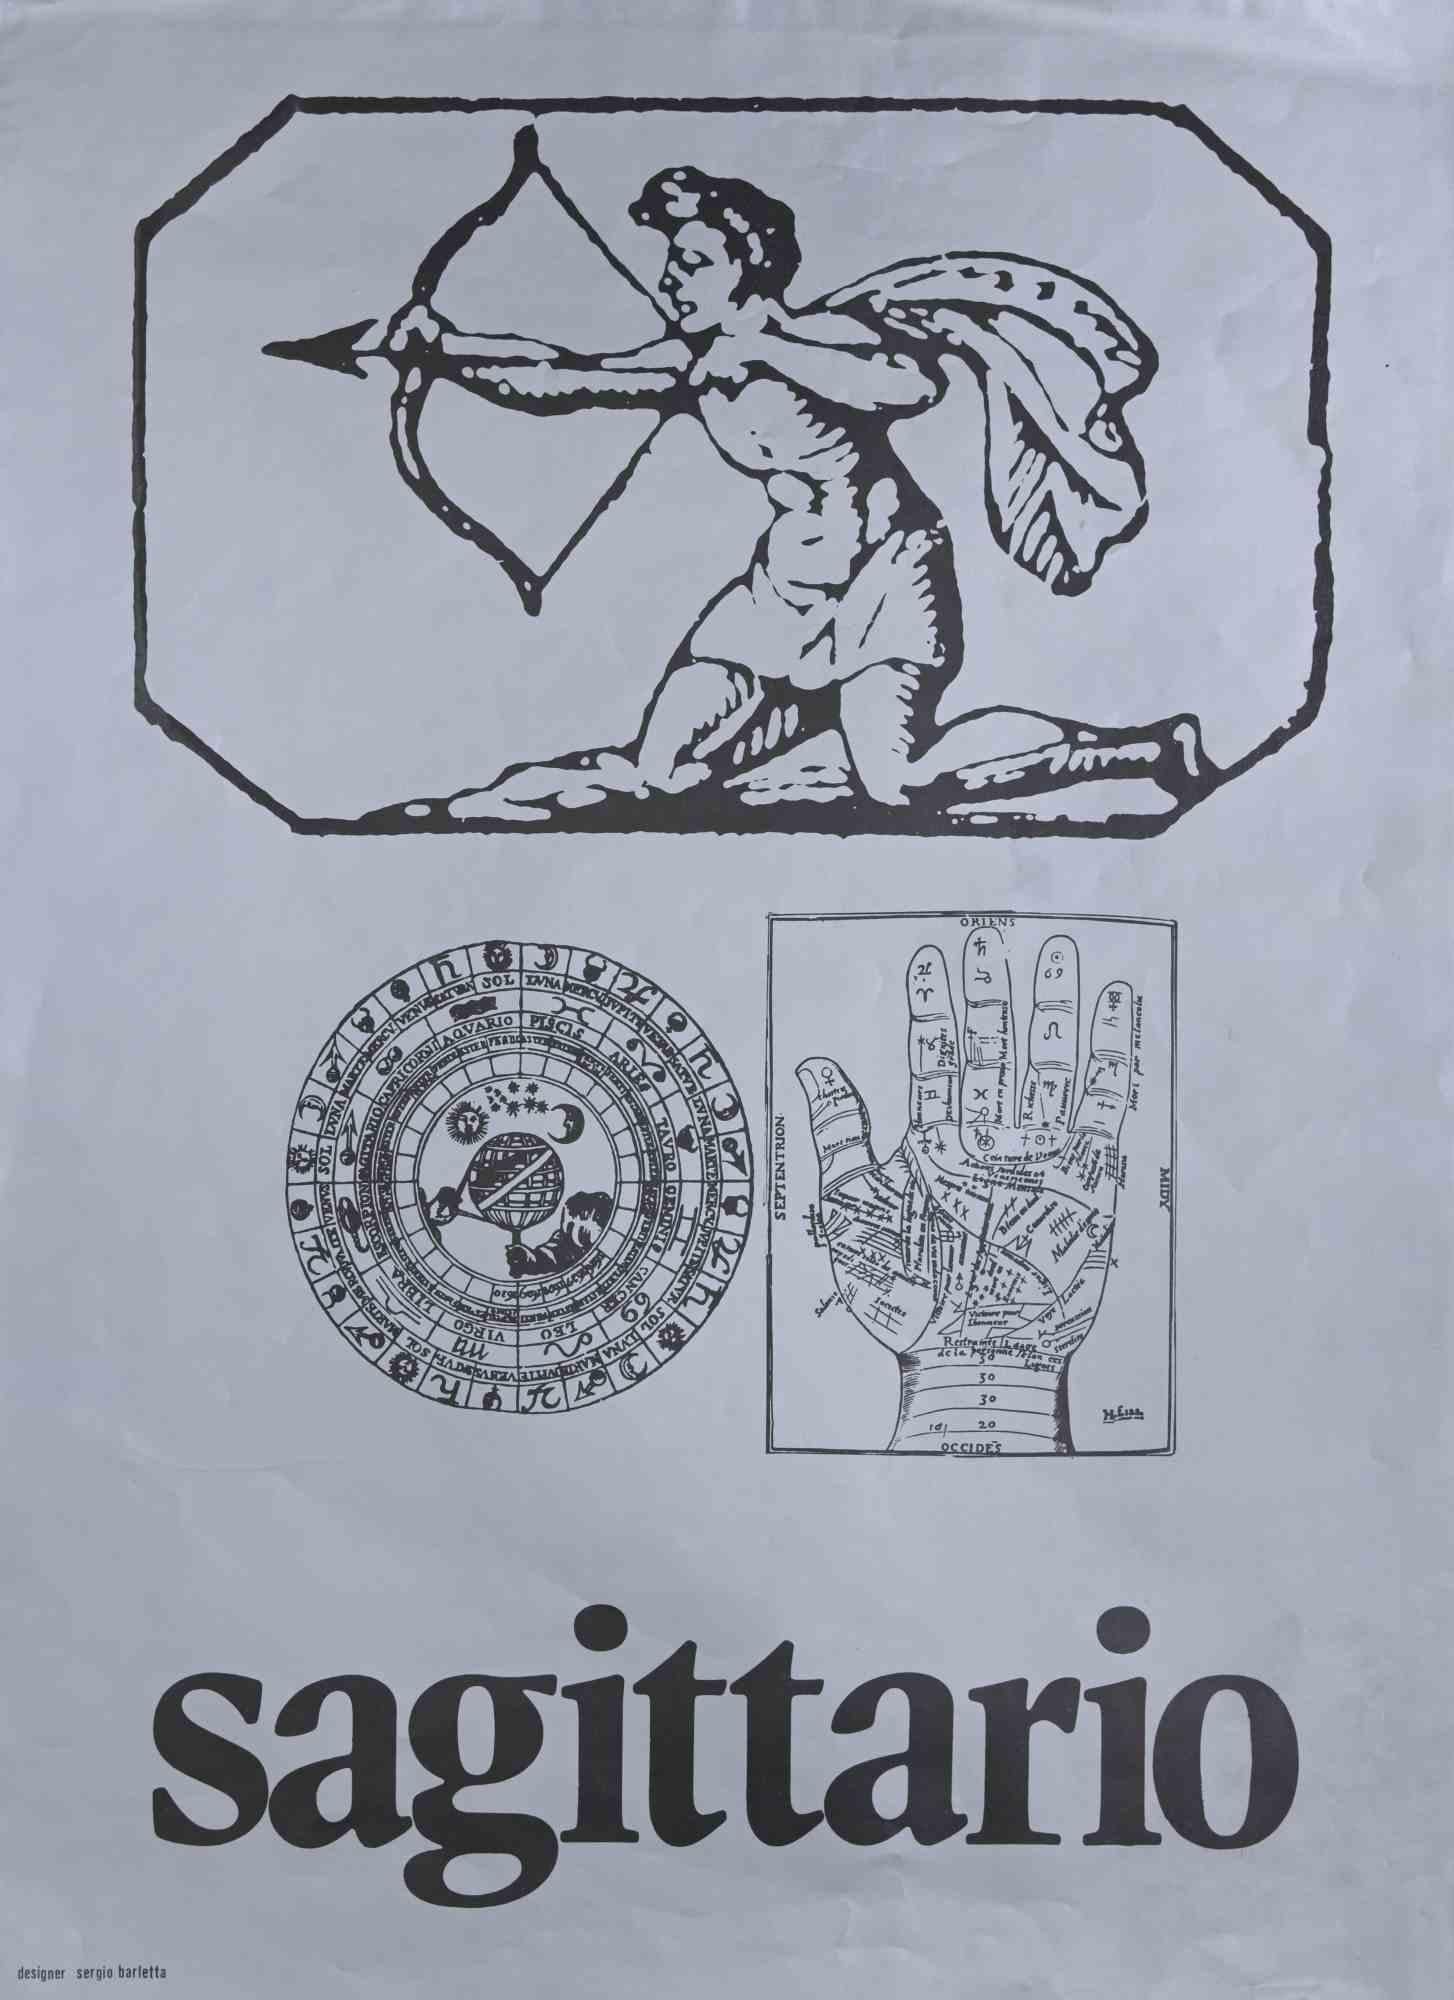 Sagittarius is a screen print on grey paper realized by Sergio Barletta in 1973. 

68 x 50 cm.

Good conditions.

Sergio Barletta  (1934) is an Italian cartoonist and illustrator, who has also published some humorous and political satire books. From